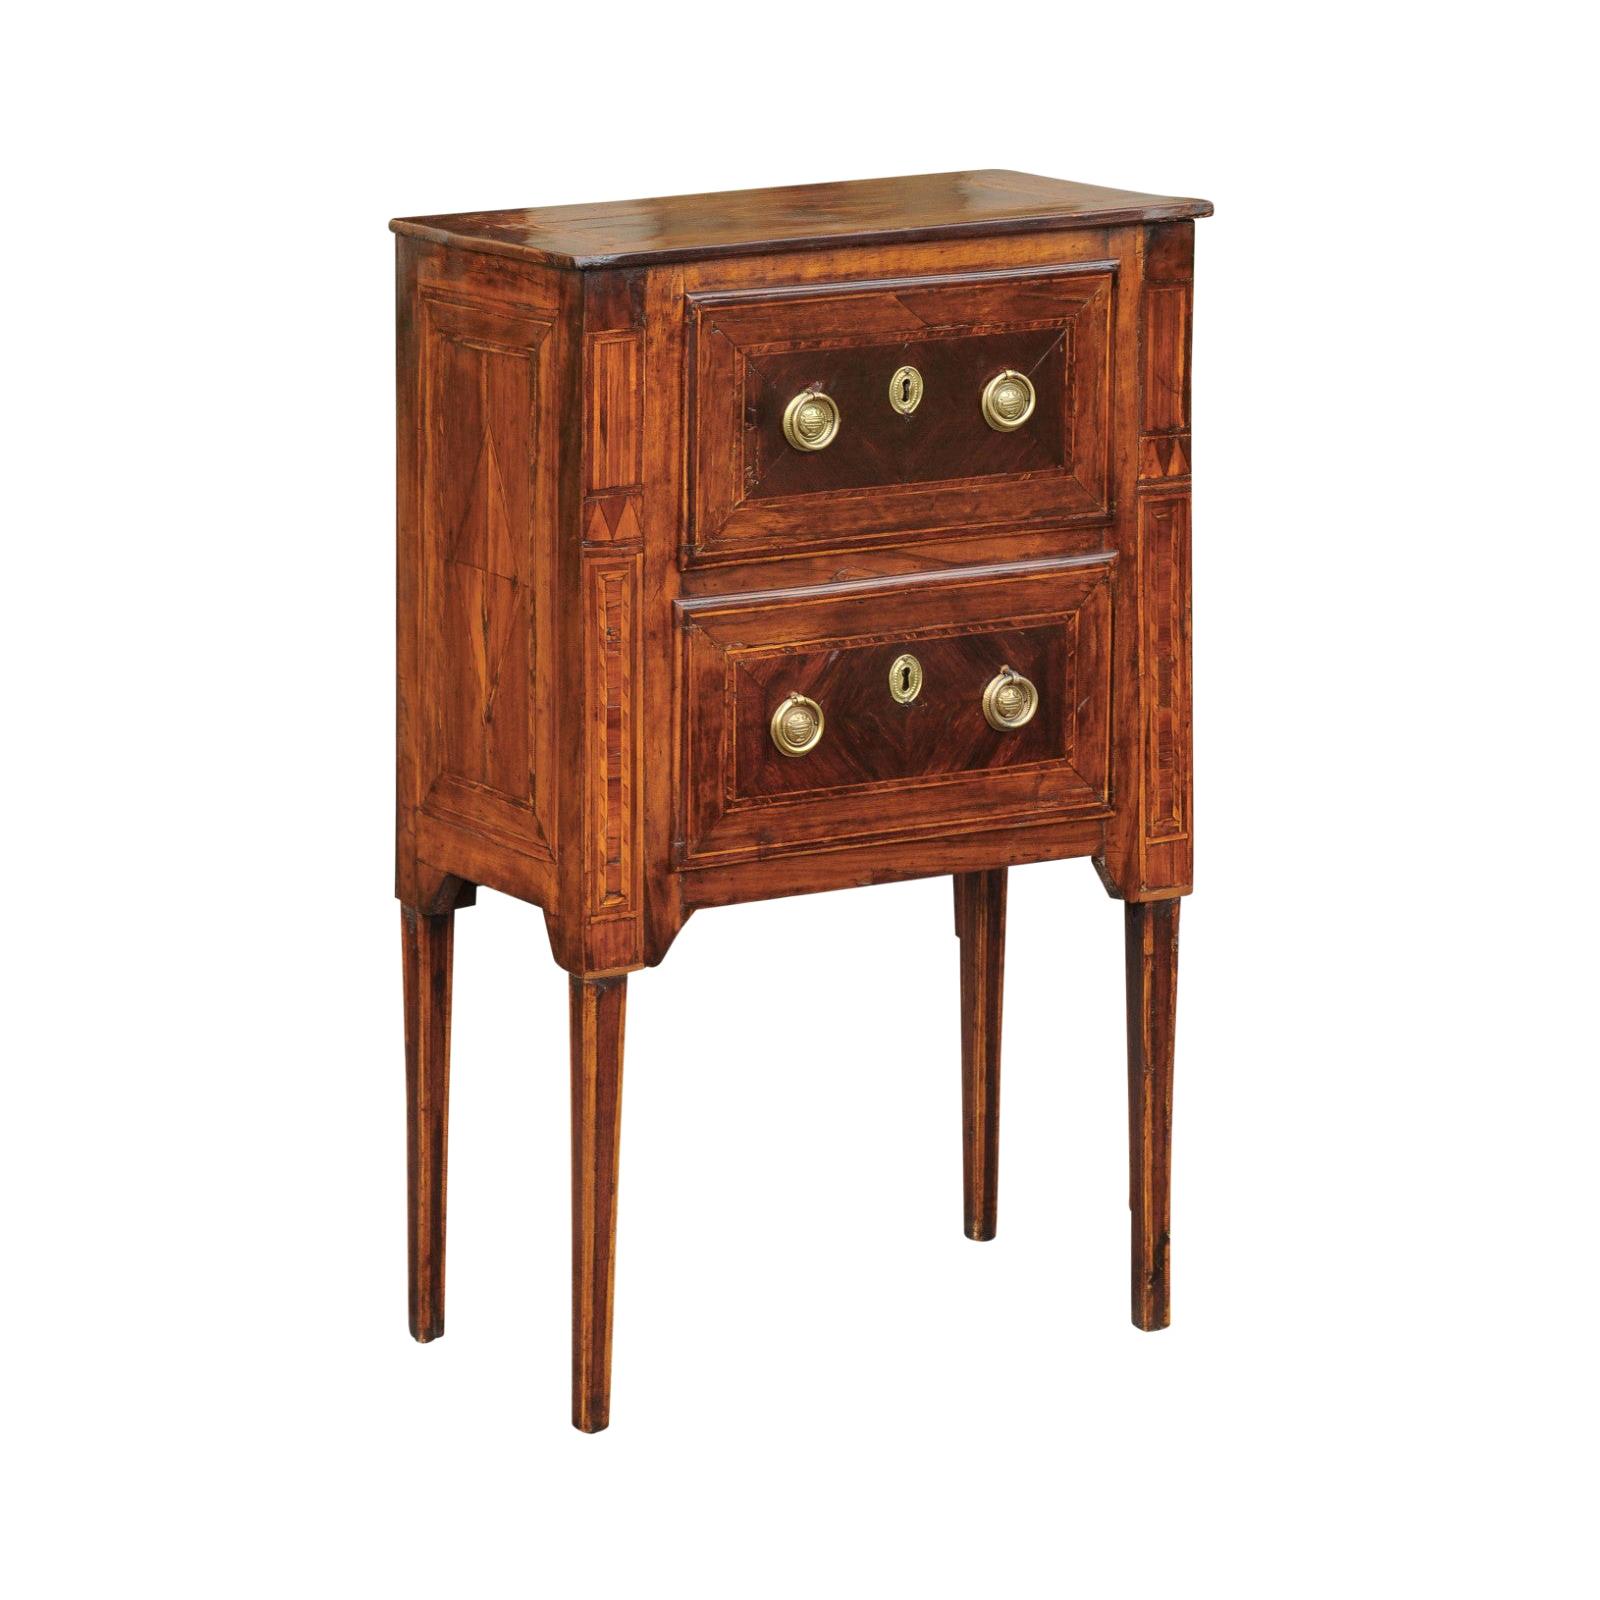 Petite Italian Neoclassical Period Walnut Commode circa 1800 with Inlaid Décor